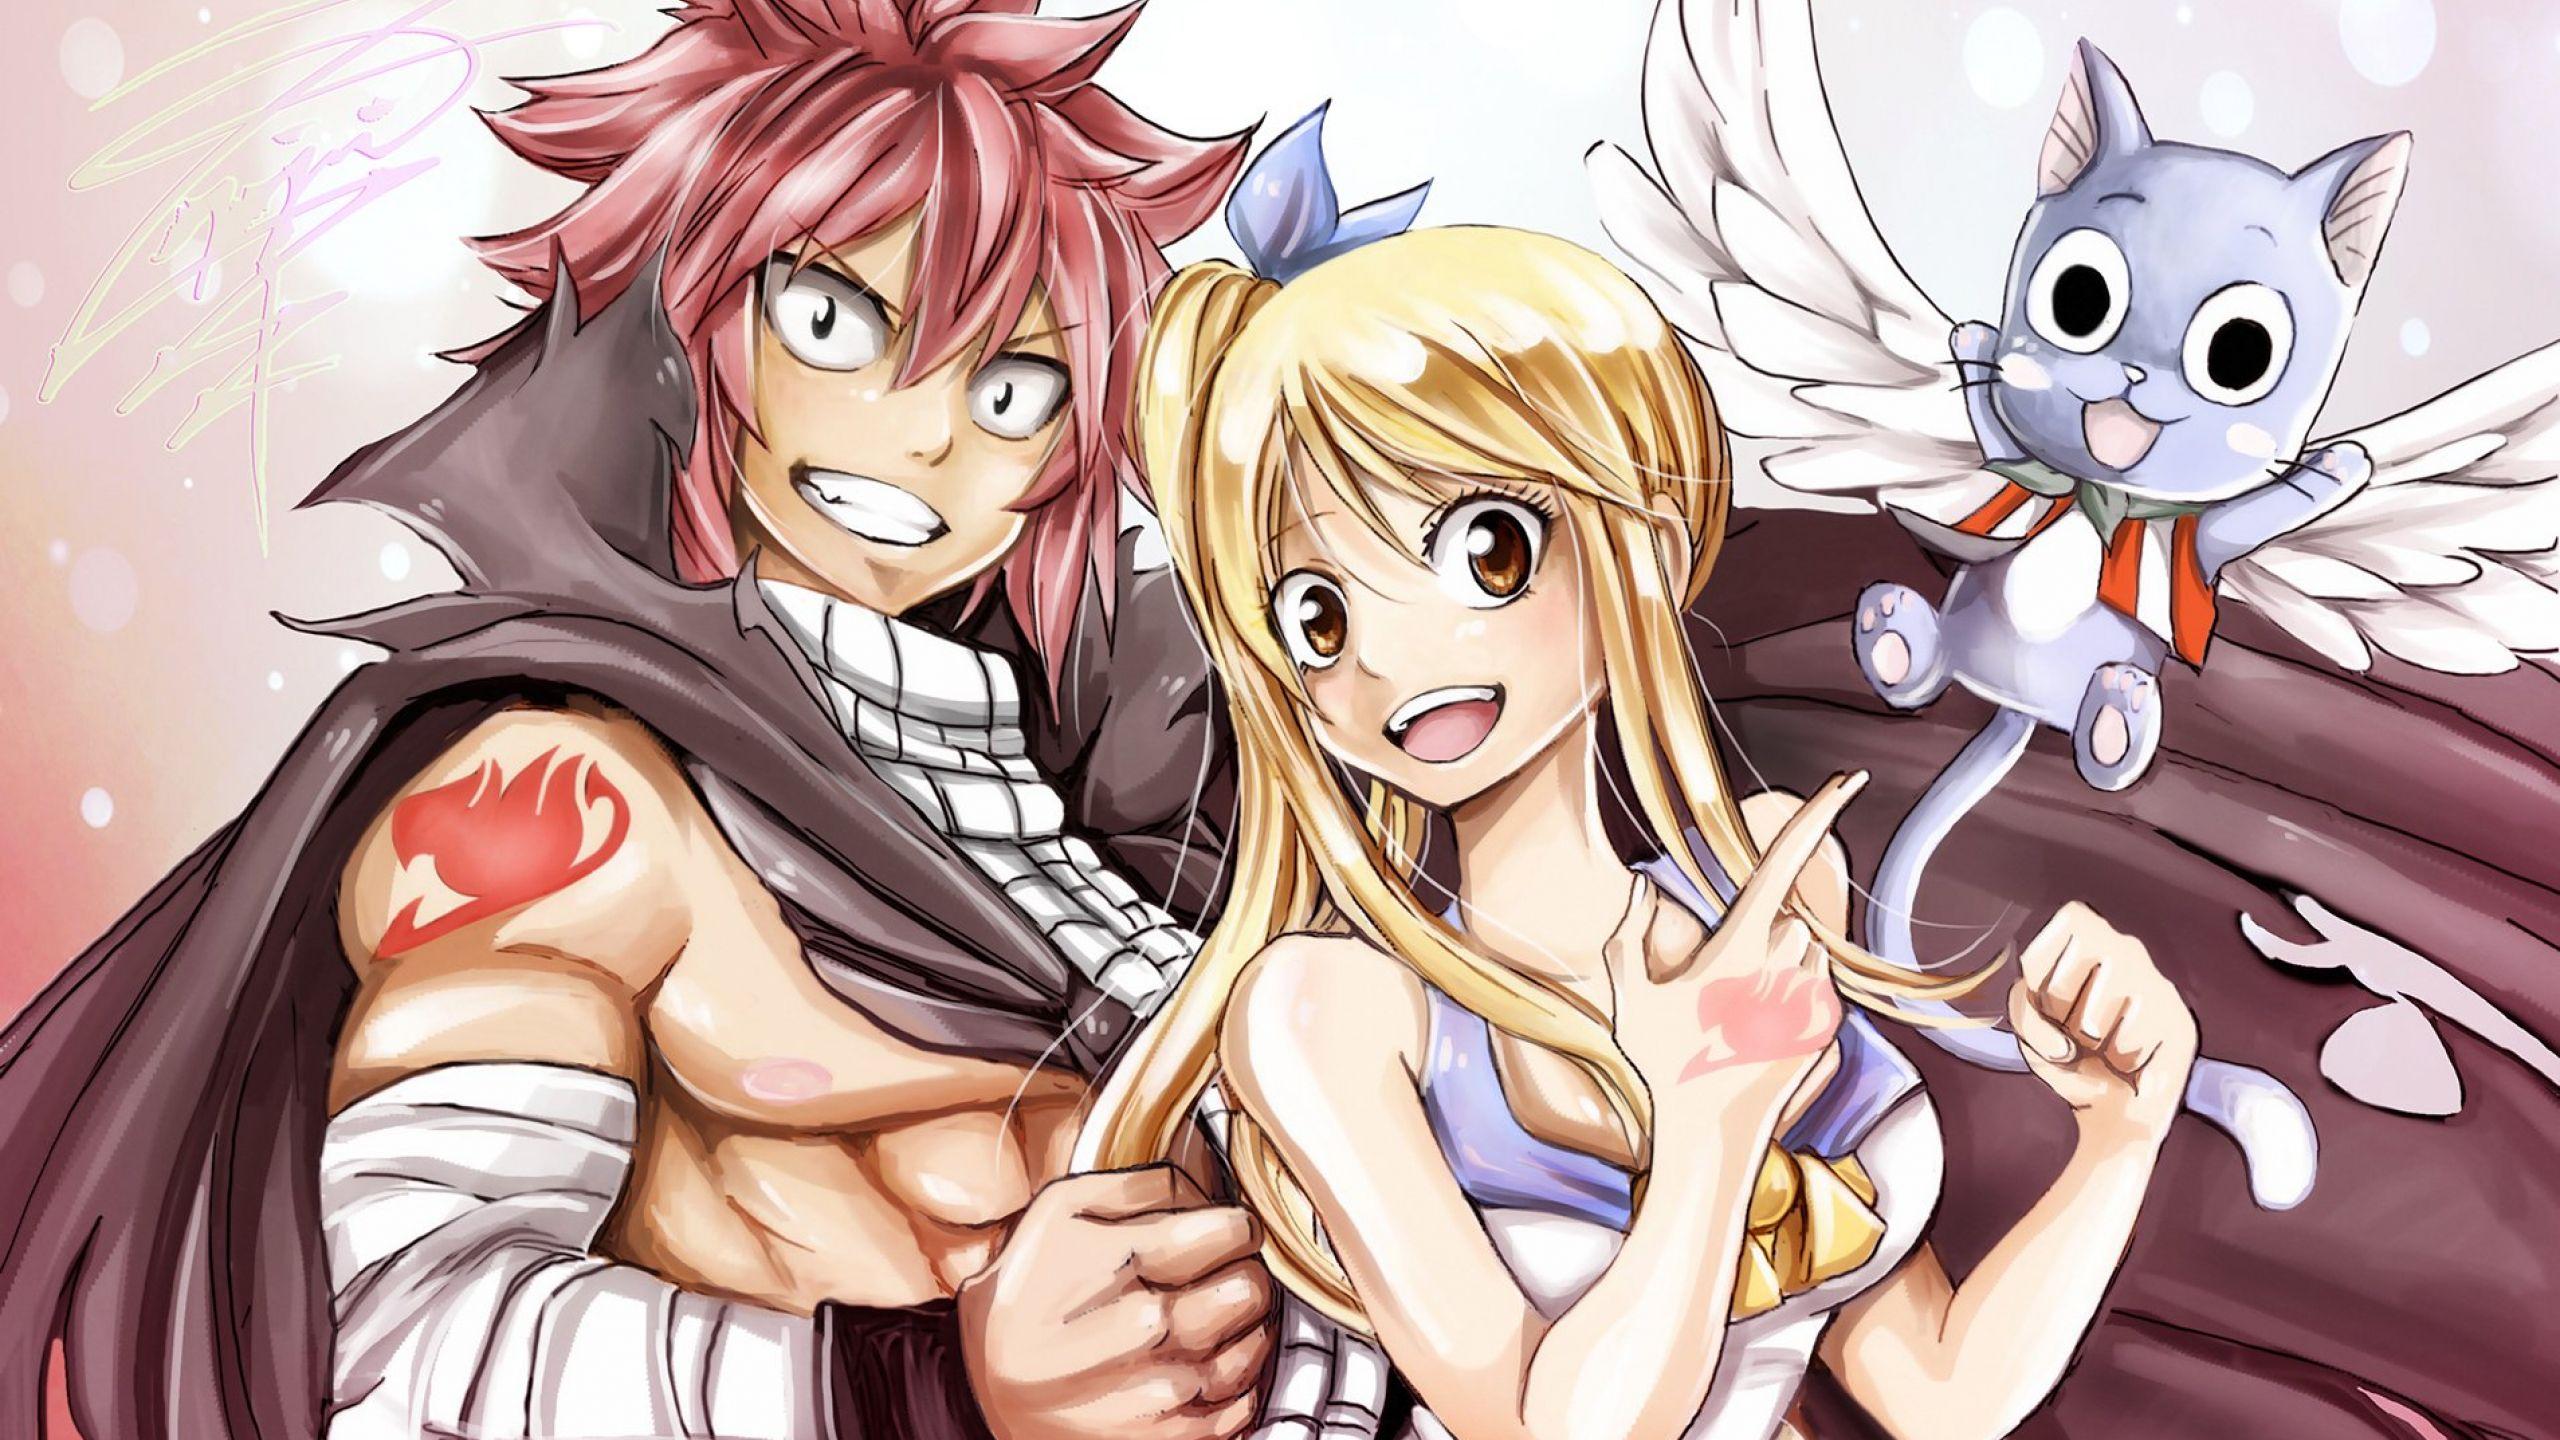 Fairy Tail 425 Lucy by laylaredfox | Daily Anime Art